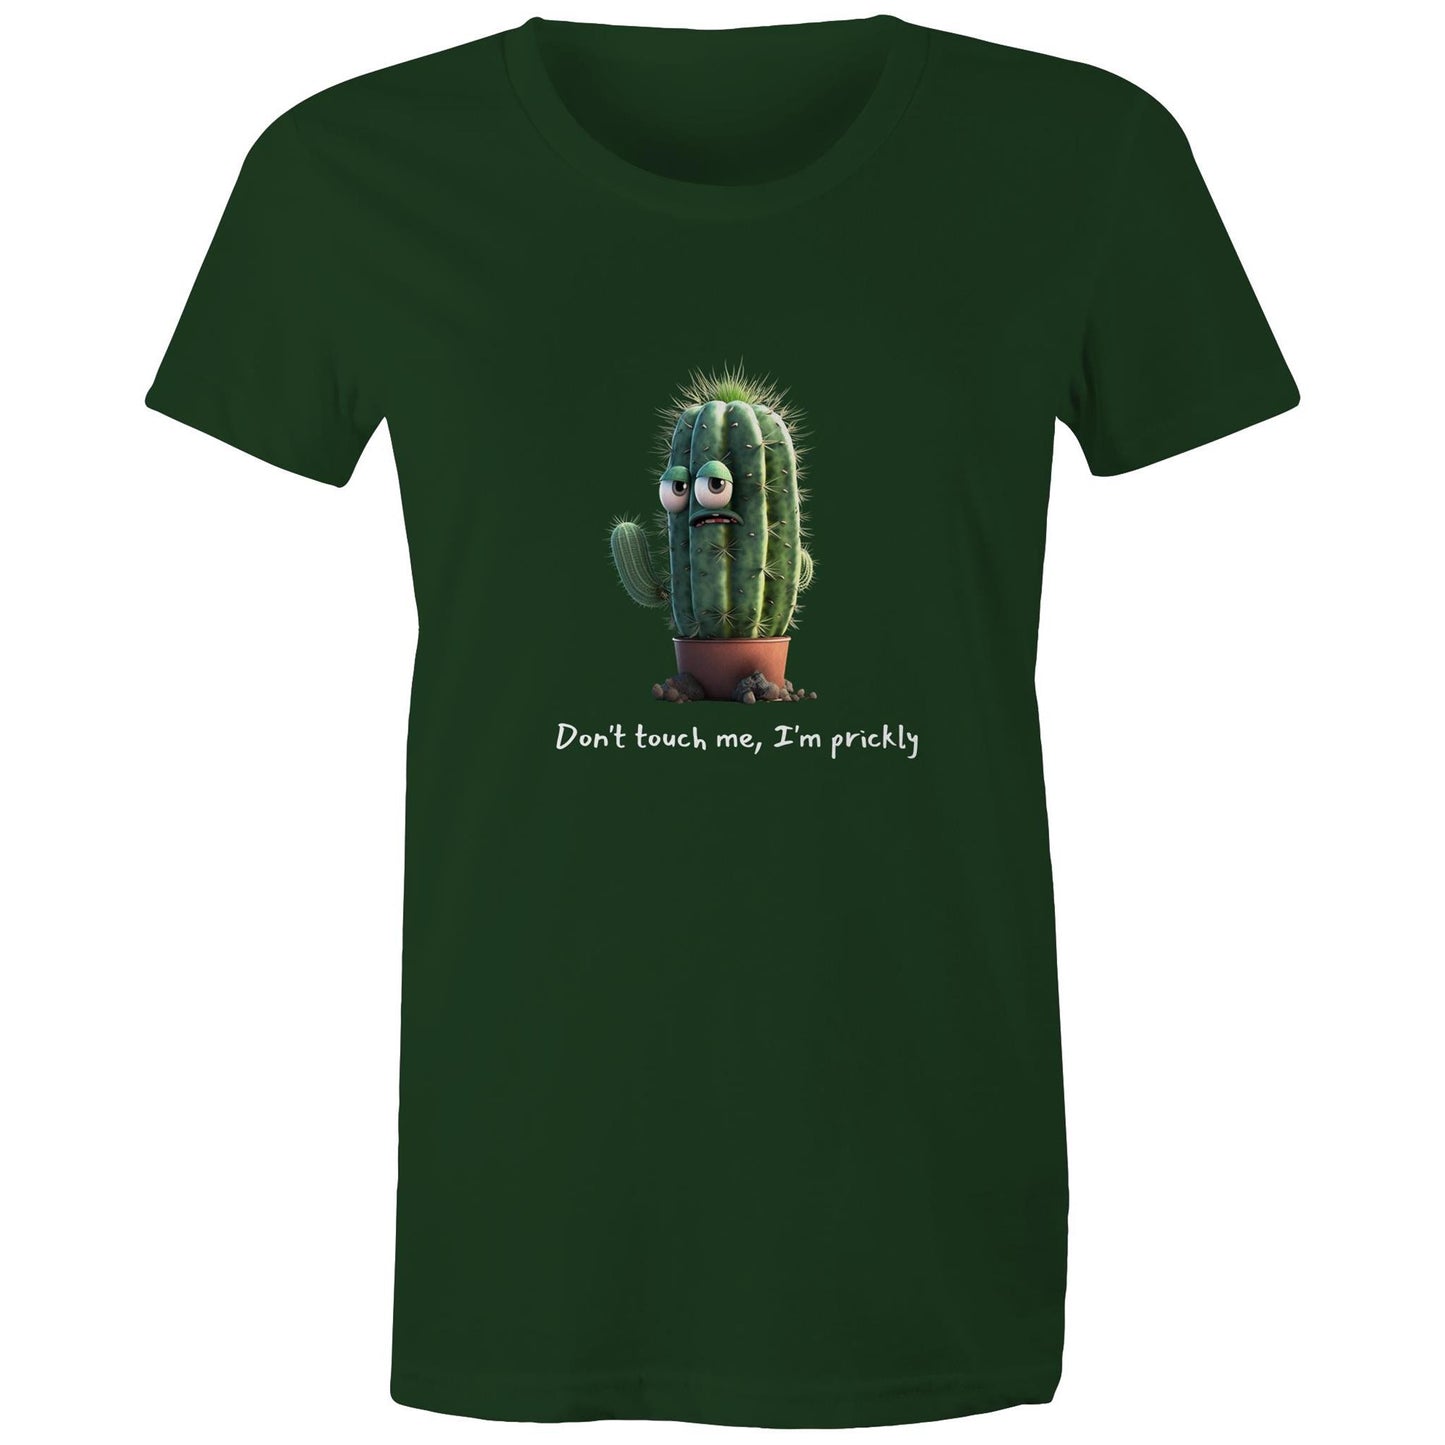 Don't Touch me, I'm prickly Women's Maple Tee